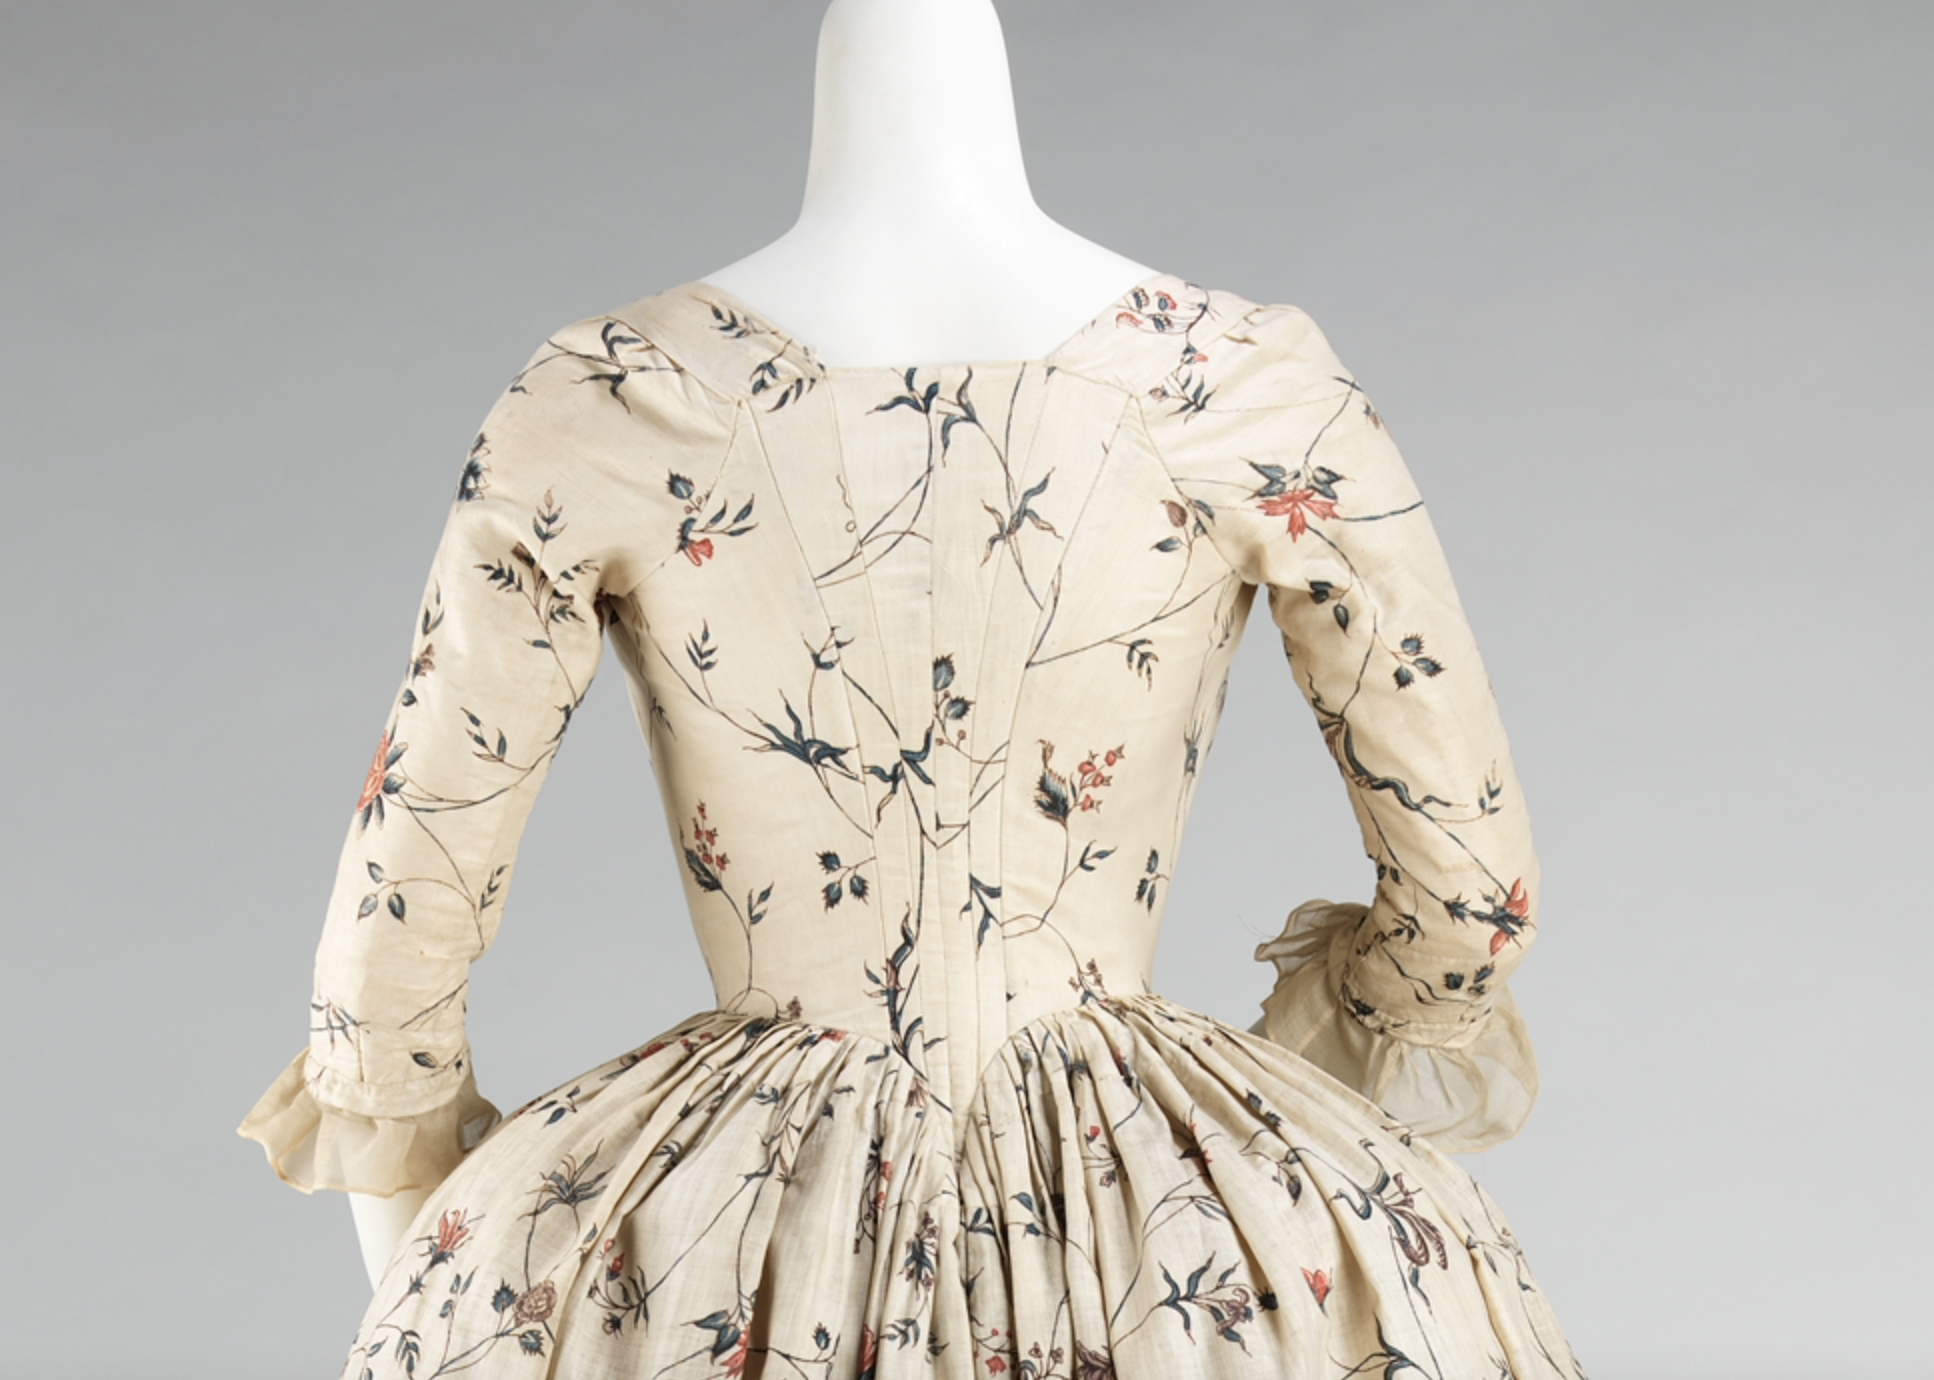 Robe à l'Anglaise (actually an Italian gown with bodice cut separate to the skirt), 1785–95, American, cotton, baleen, Brooklyn Museum Costume Collection at The Metropolitan Museum of Art, 2009.300.647